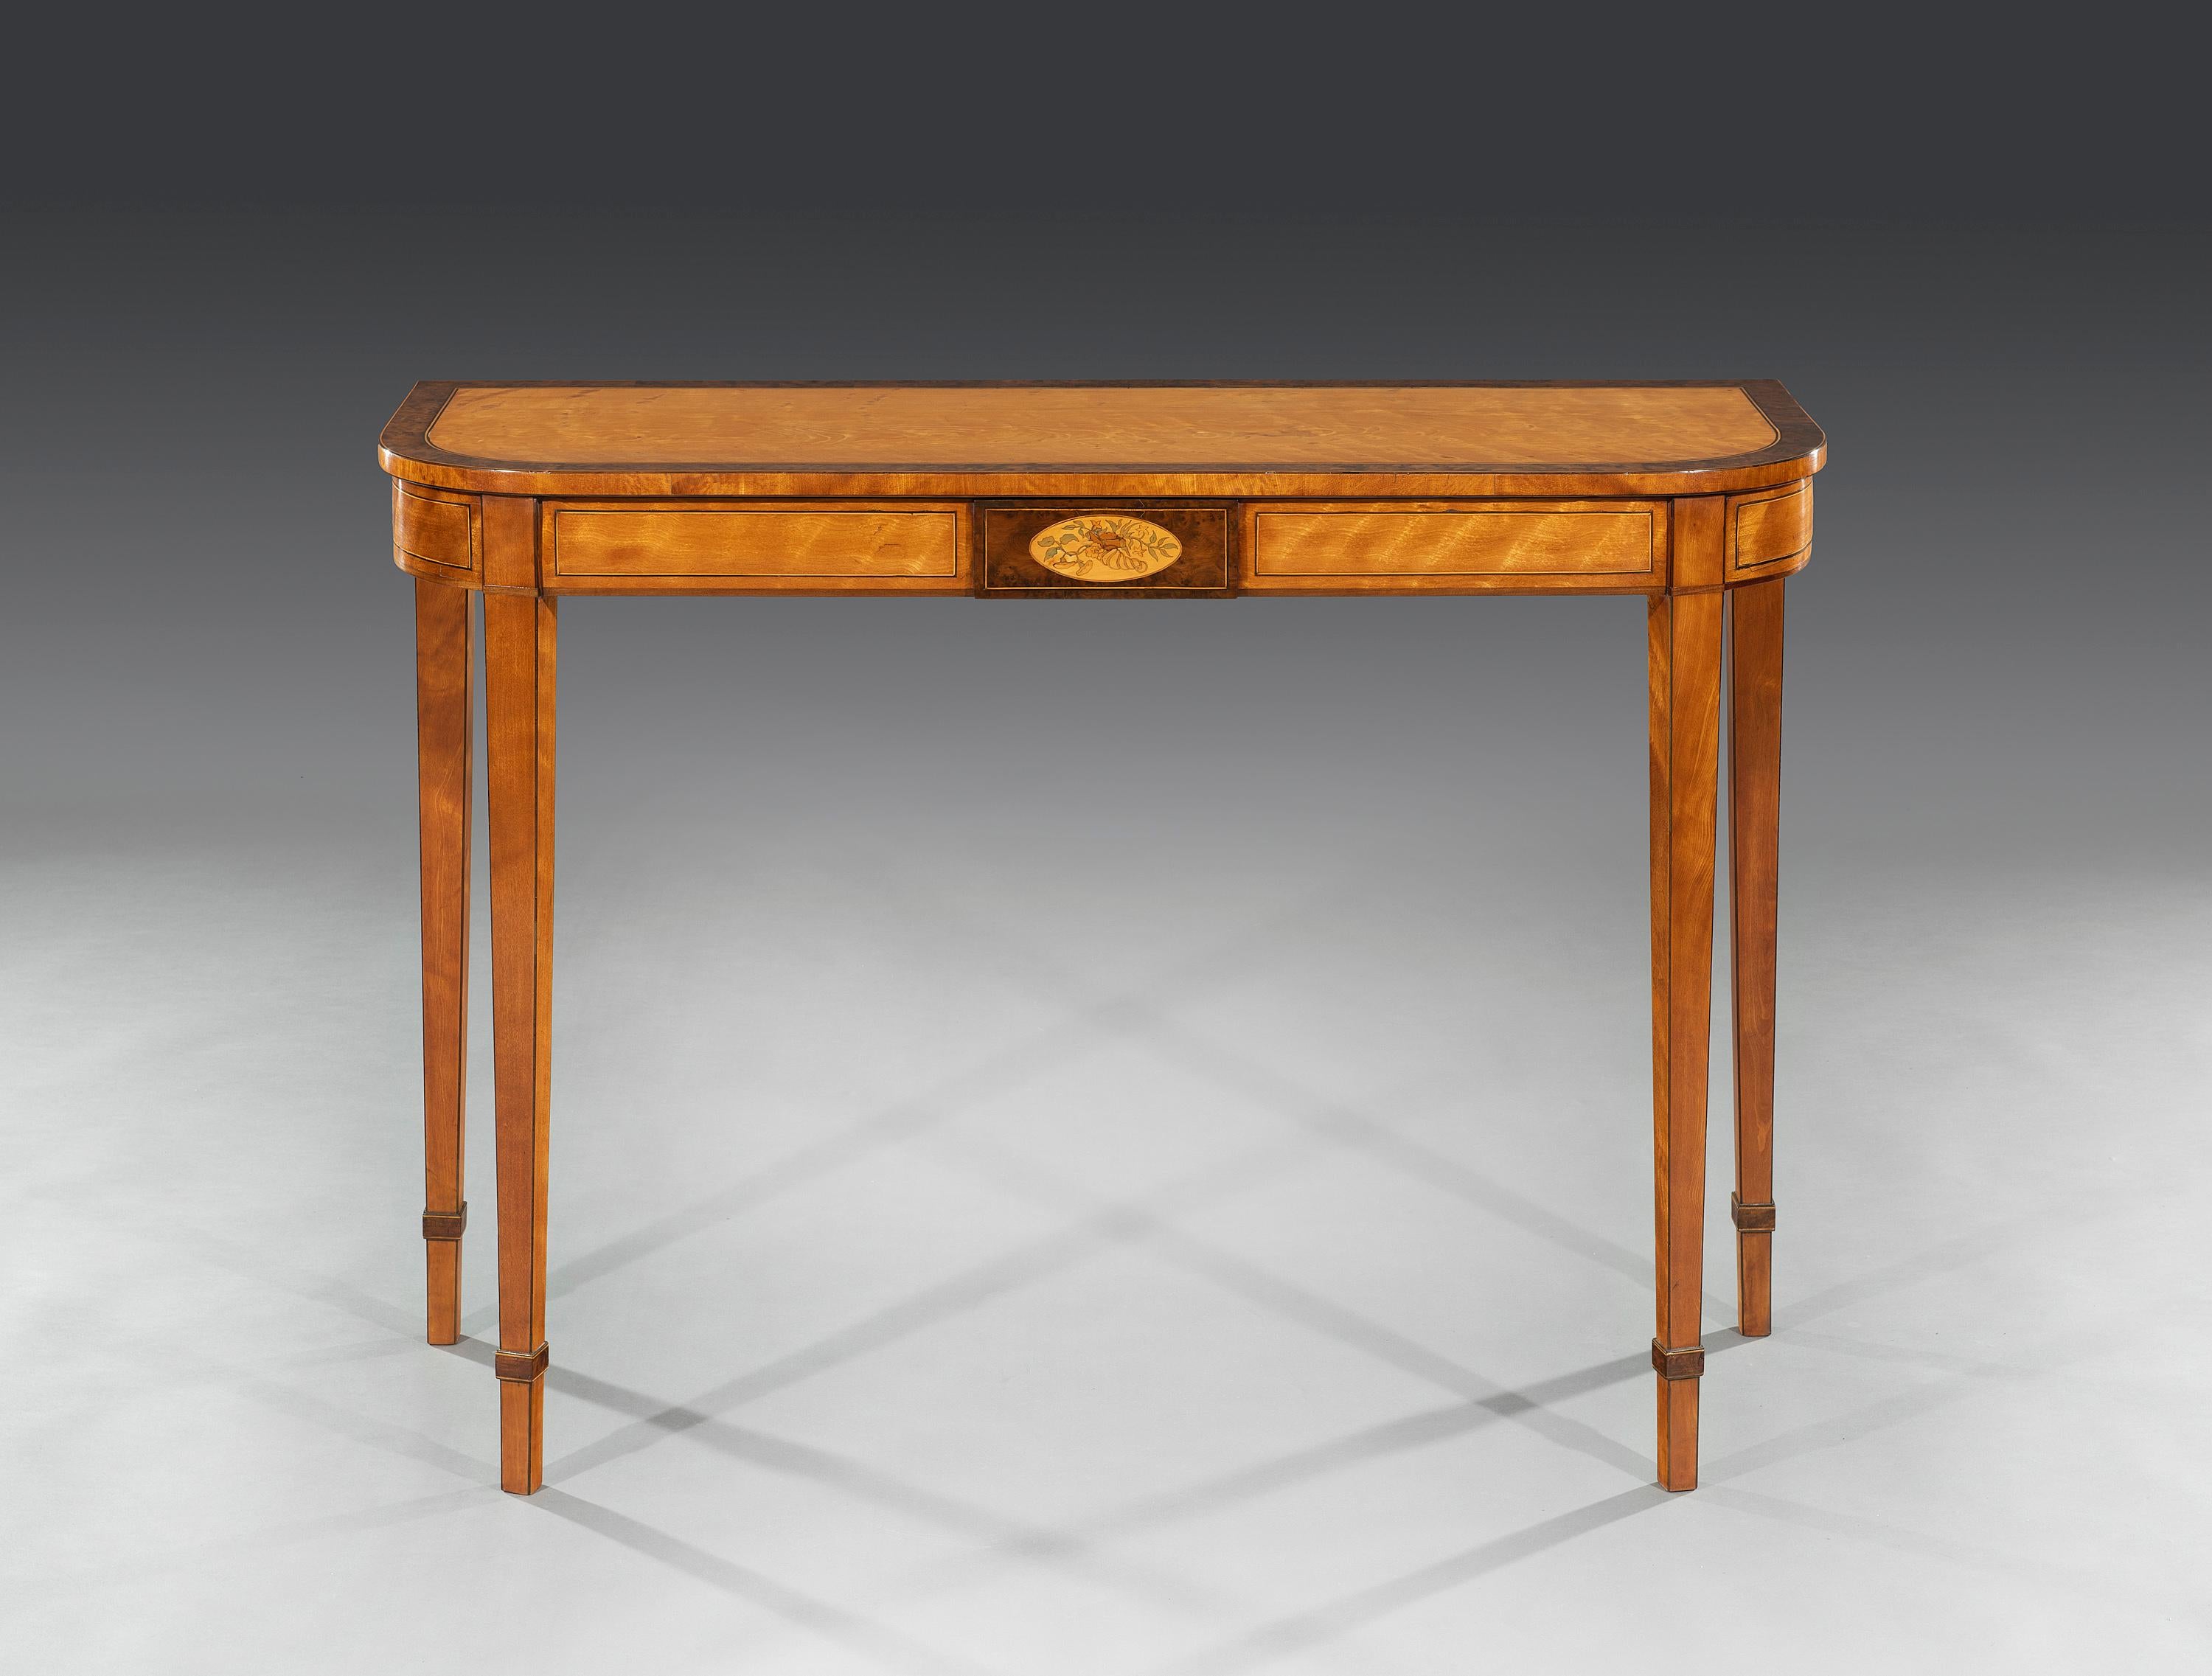 The top is crossbanded with burr yew and boxwood stringing above a banded frieze and floral marquetry inlaid centre panel. The table stands on finely tapered legs.